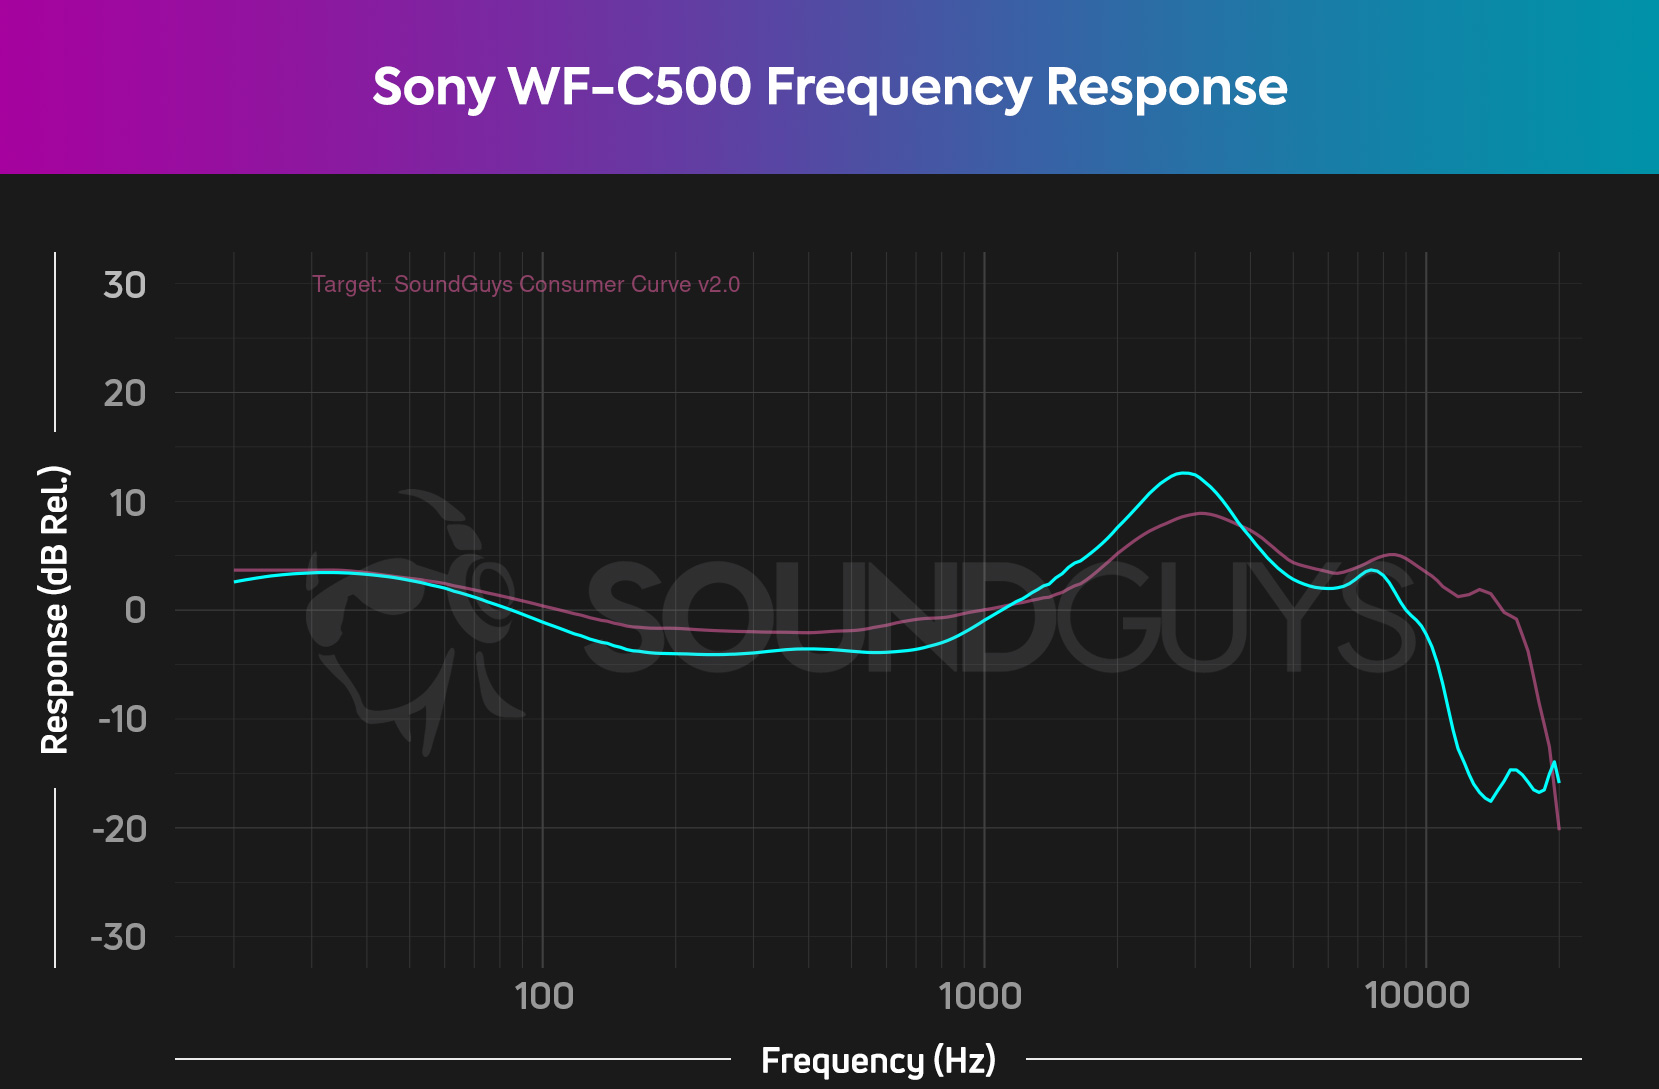 A chart depicts the Sony WF-C500 (cyan) frequency response relative to the SoundGuys Consumer Curve V2.0 (pink), revealing the Sony earbuds' generally pleasing sound with slightly amplified upper-midrange notes.